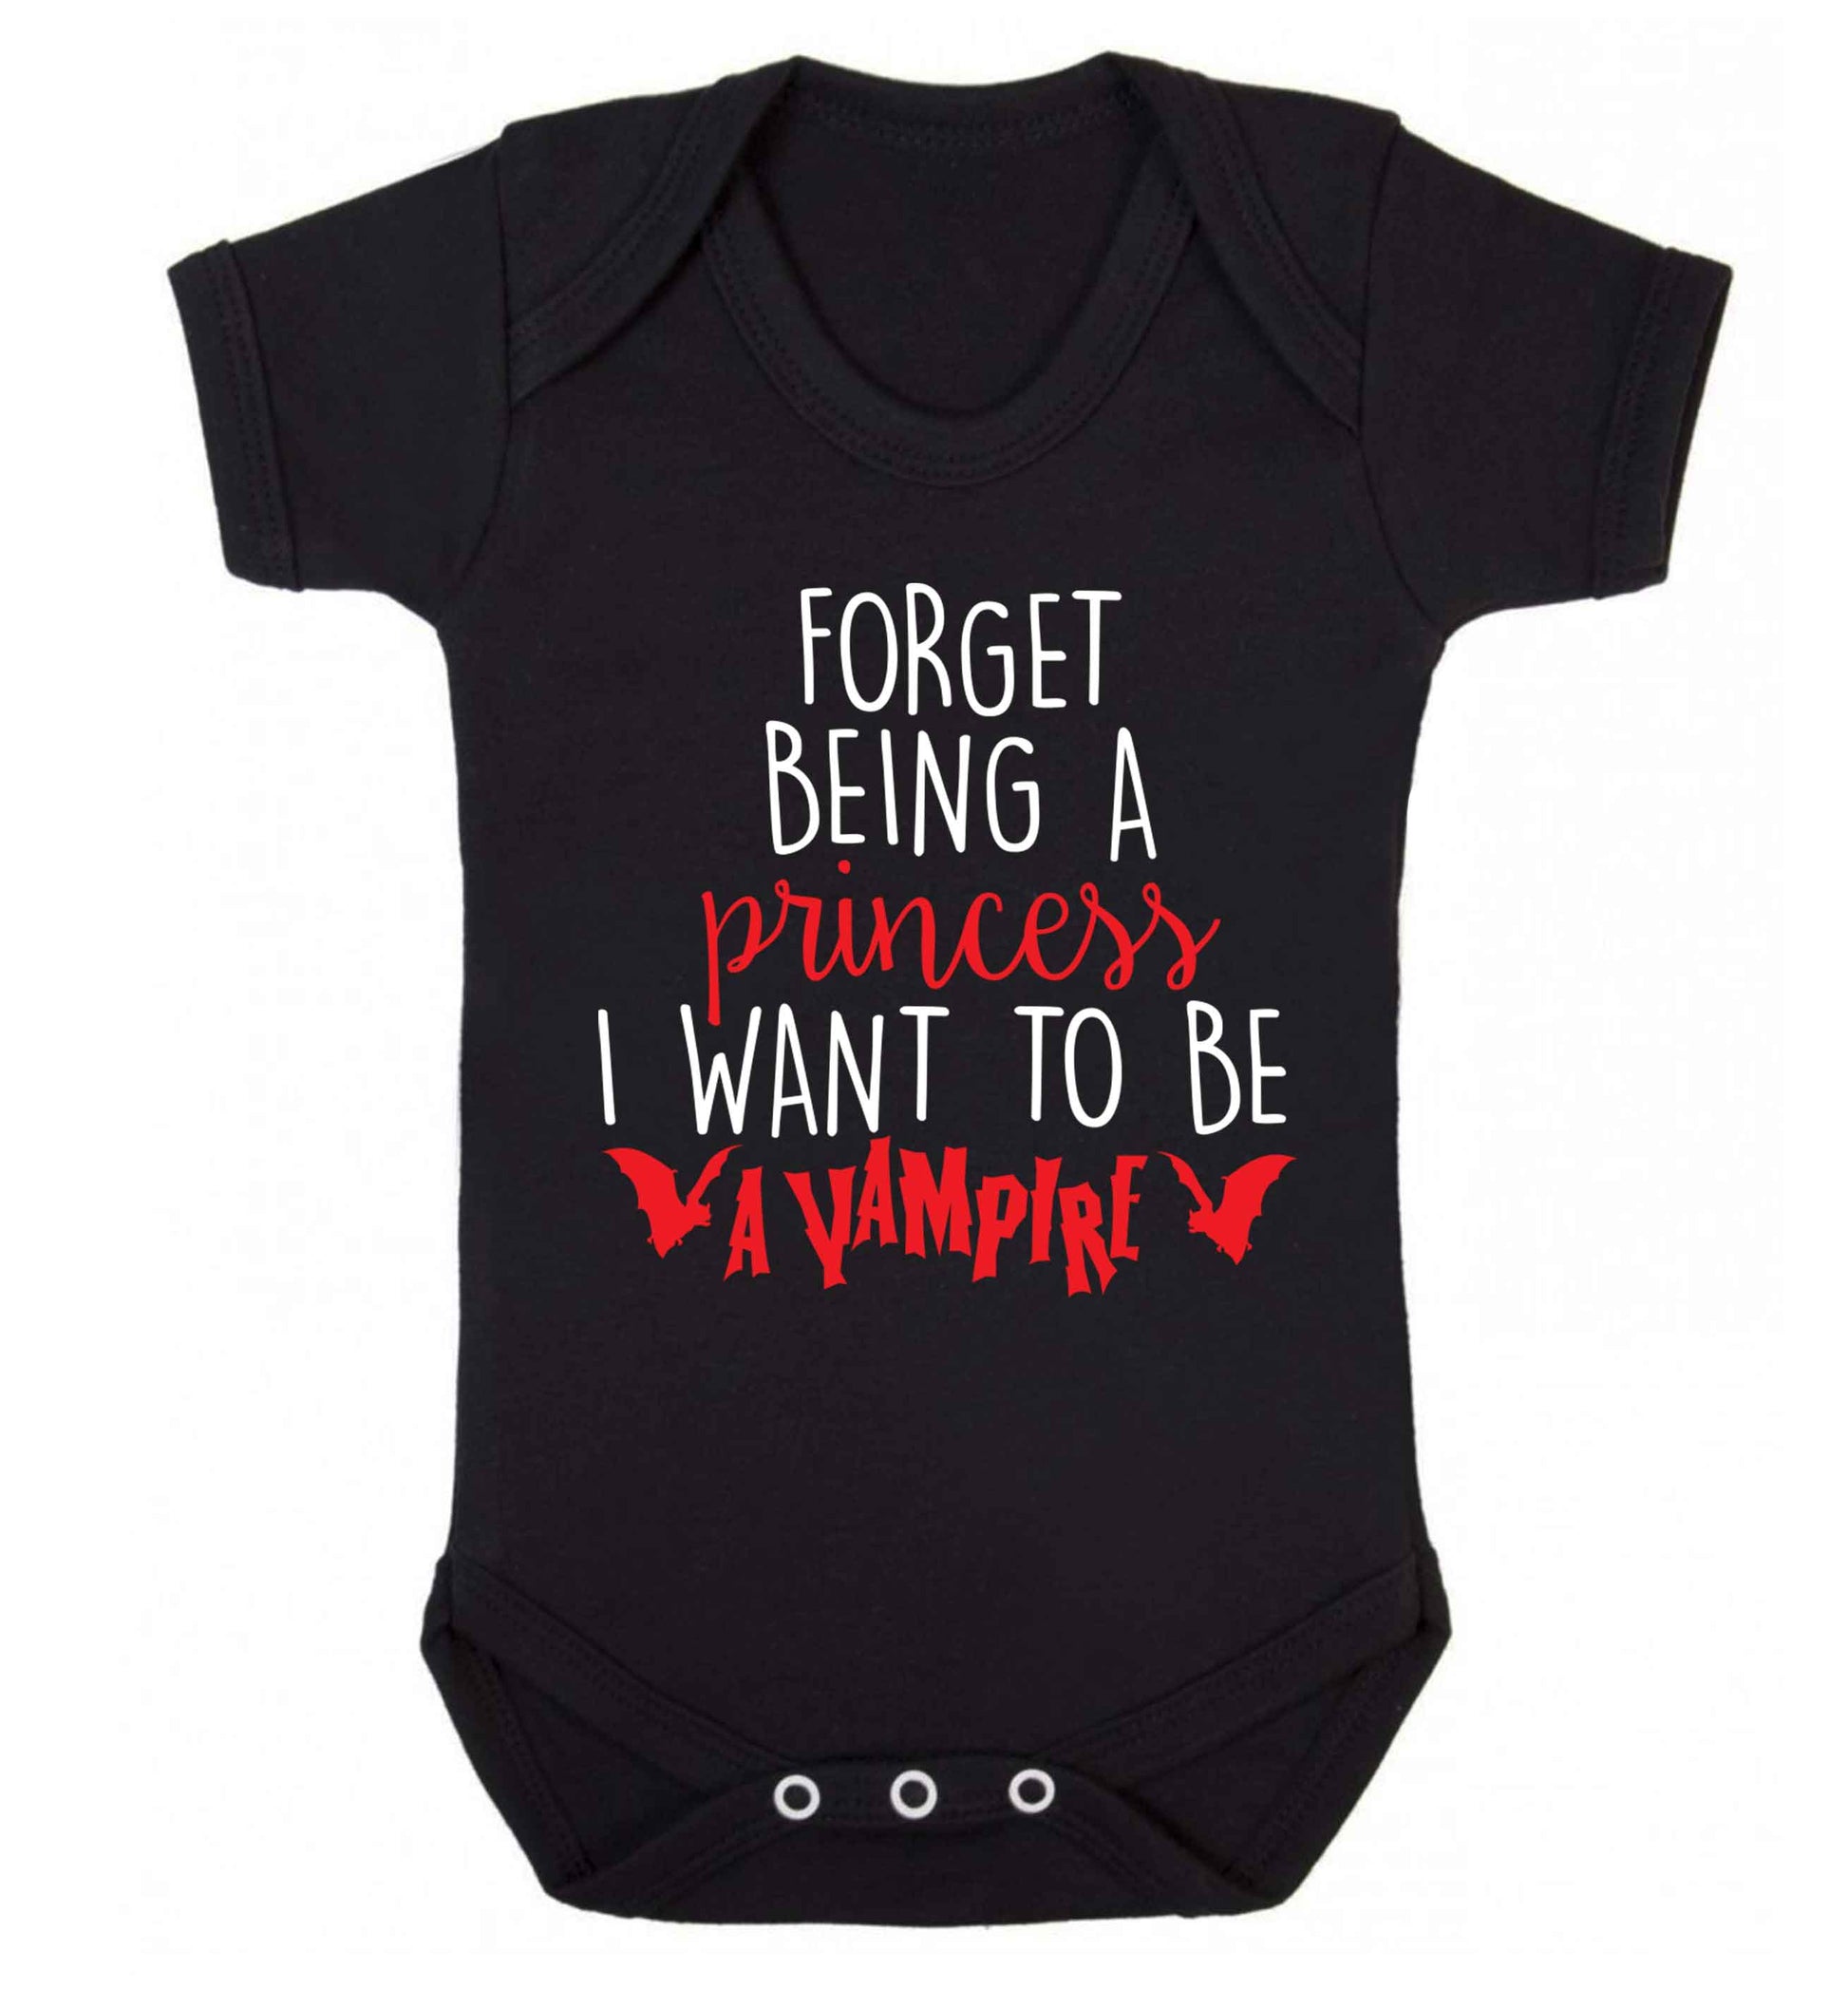 Forget being a princess I want to be a vampire Baby Vest black 18-24 months